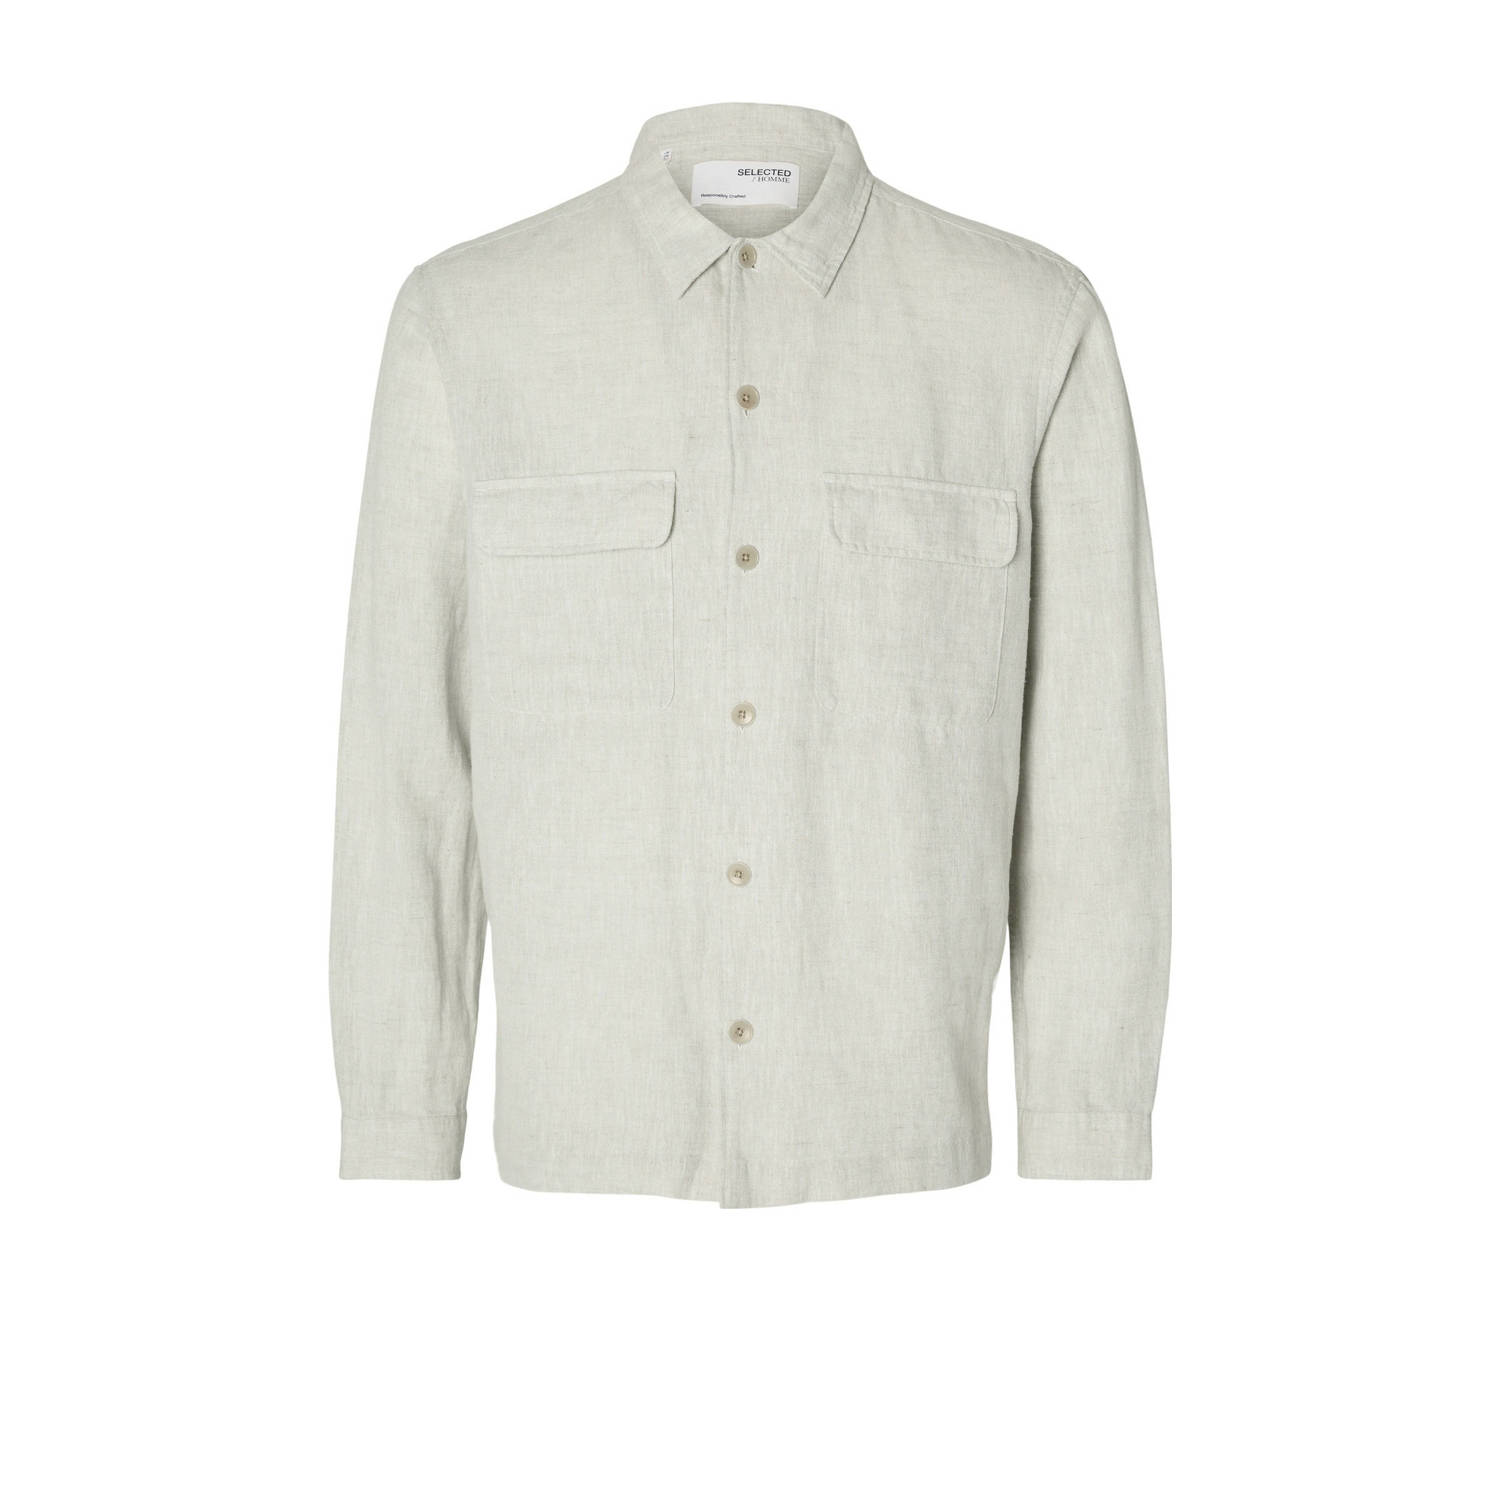 SELECTED HOMME loose fit overshirt SLHMADS grijs